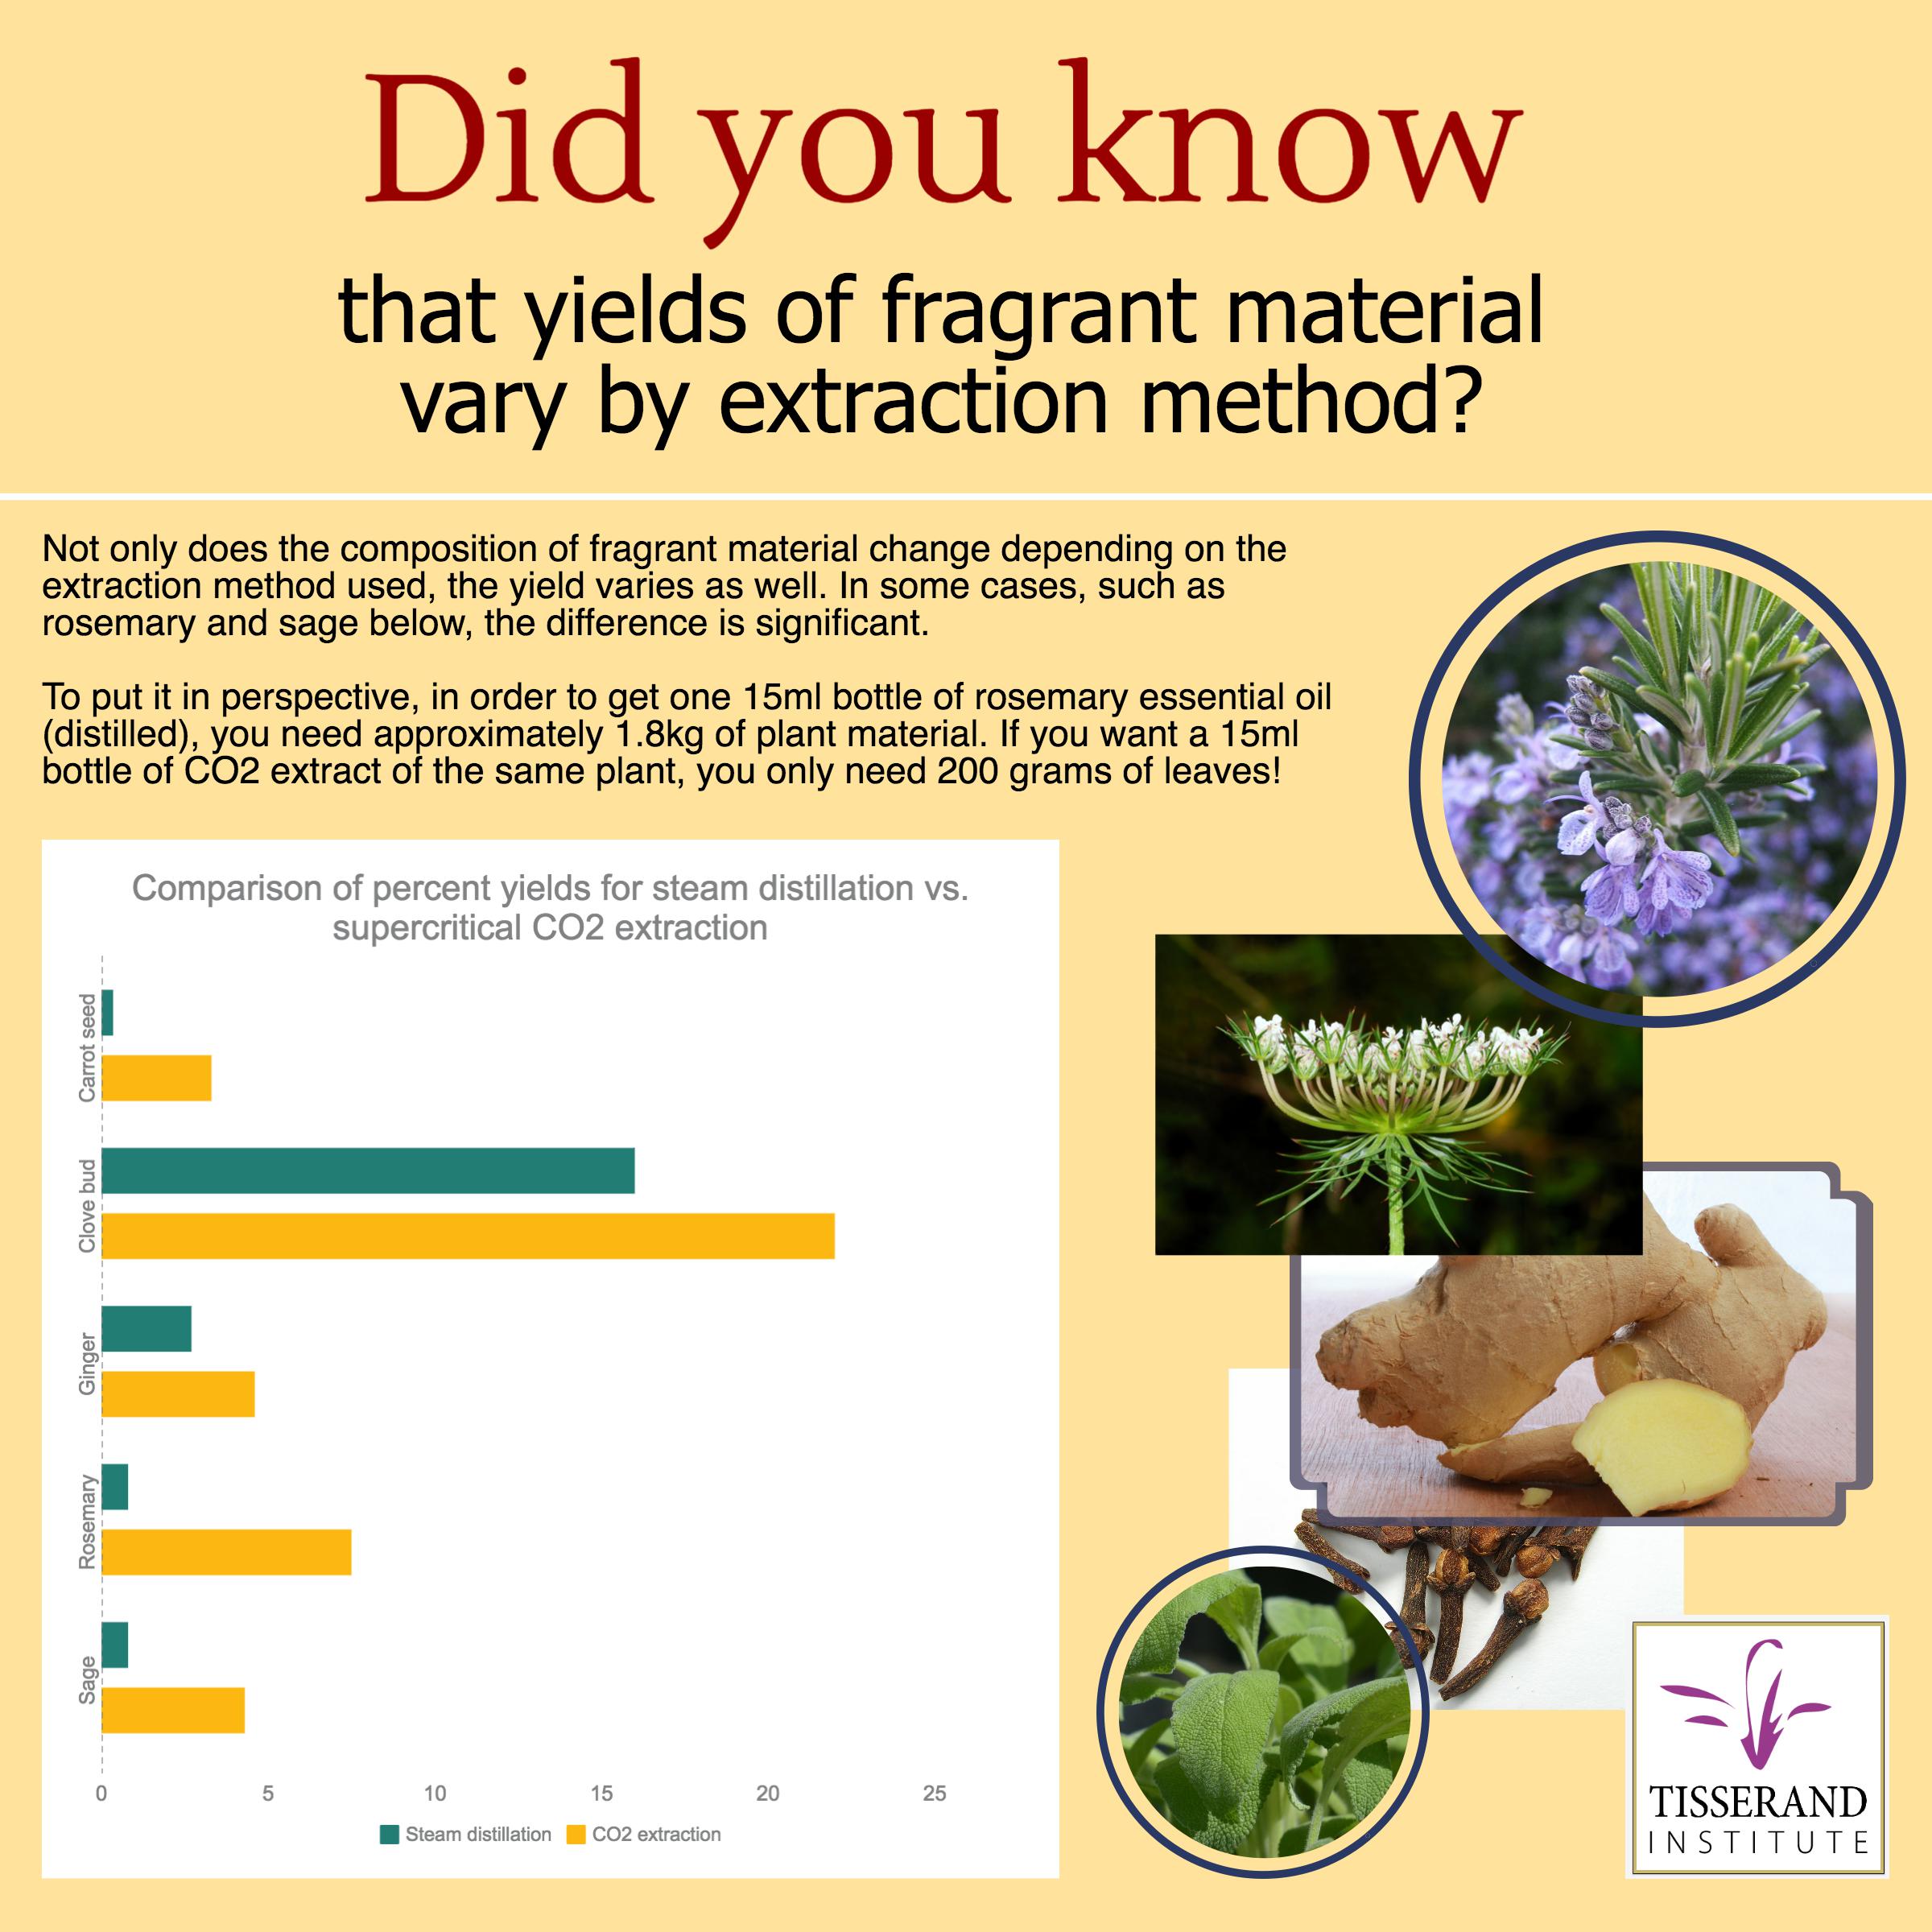 Did You Know That Fragrant Material Yields Vary by Extraction Method? #TisserandInstitute #Infographic #EssentialOils #Extraction #ExtractionMethod